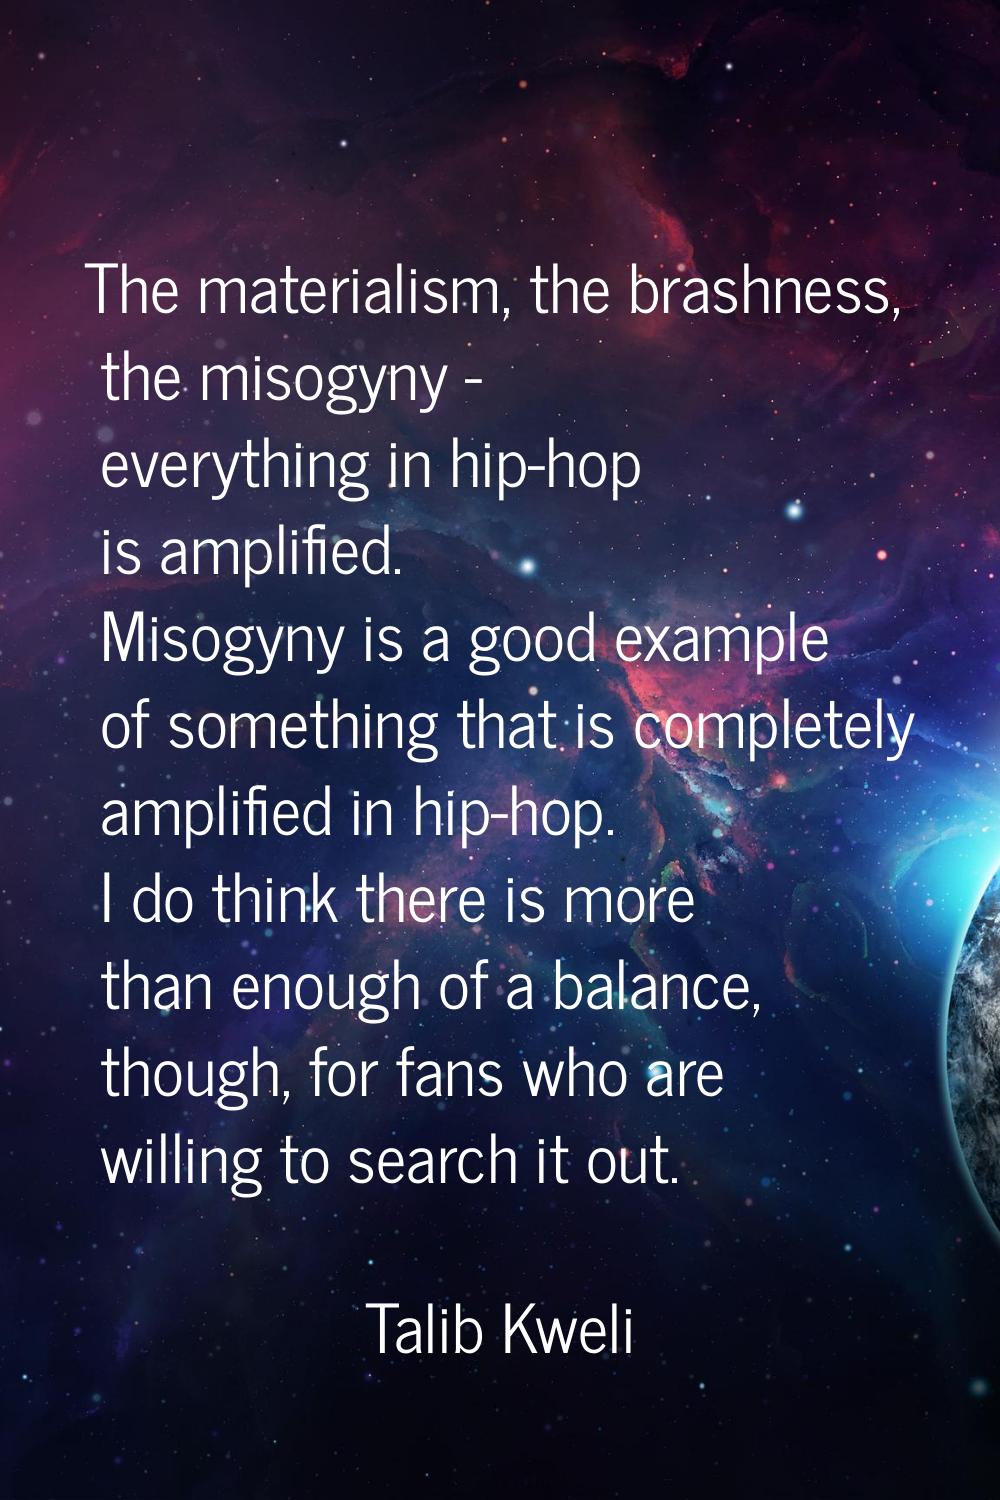 The materialism, the brashness, the misogyny - everything in hip-hop is amplified. Misogyny is a go